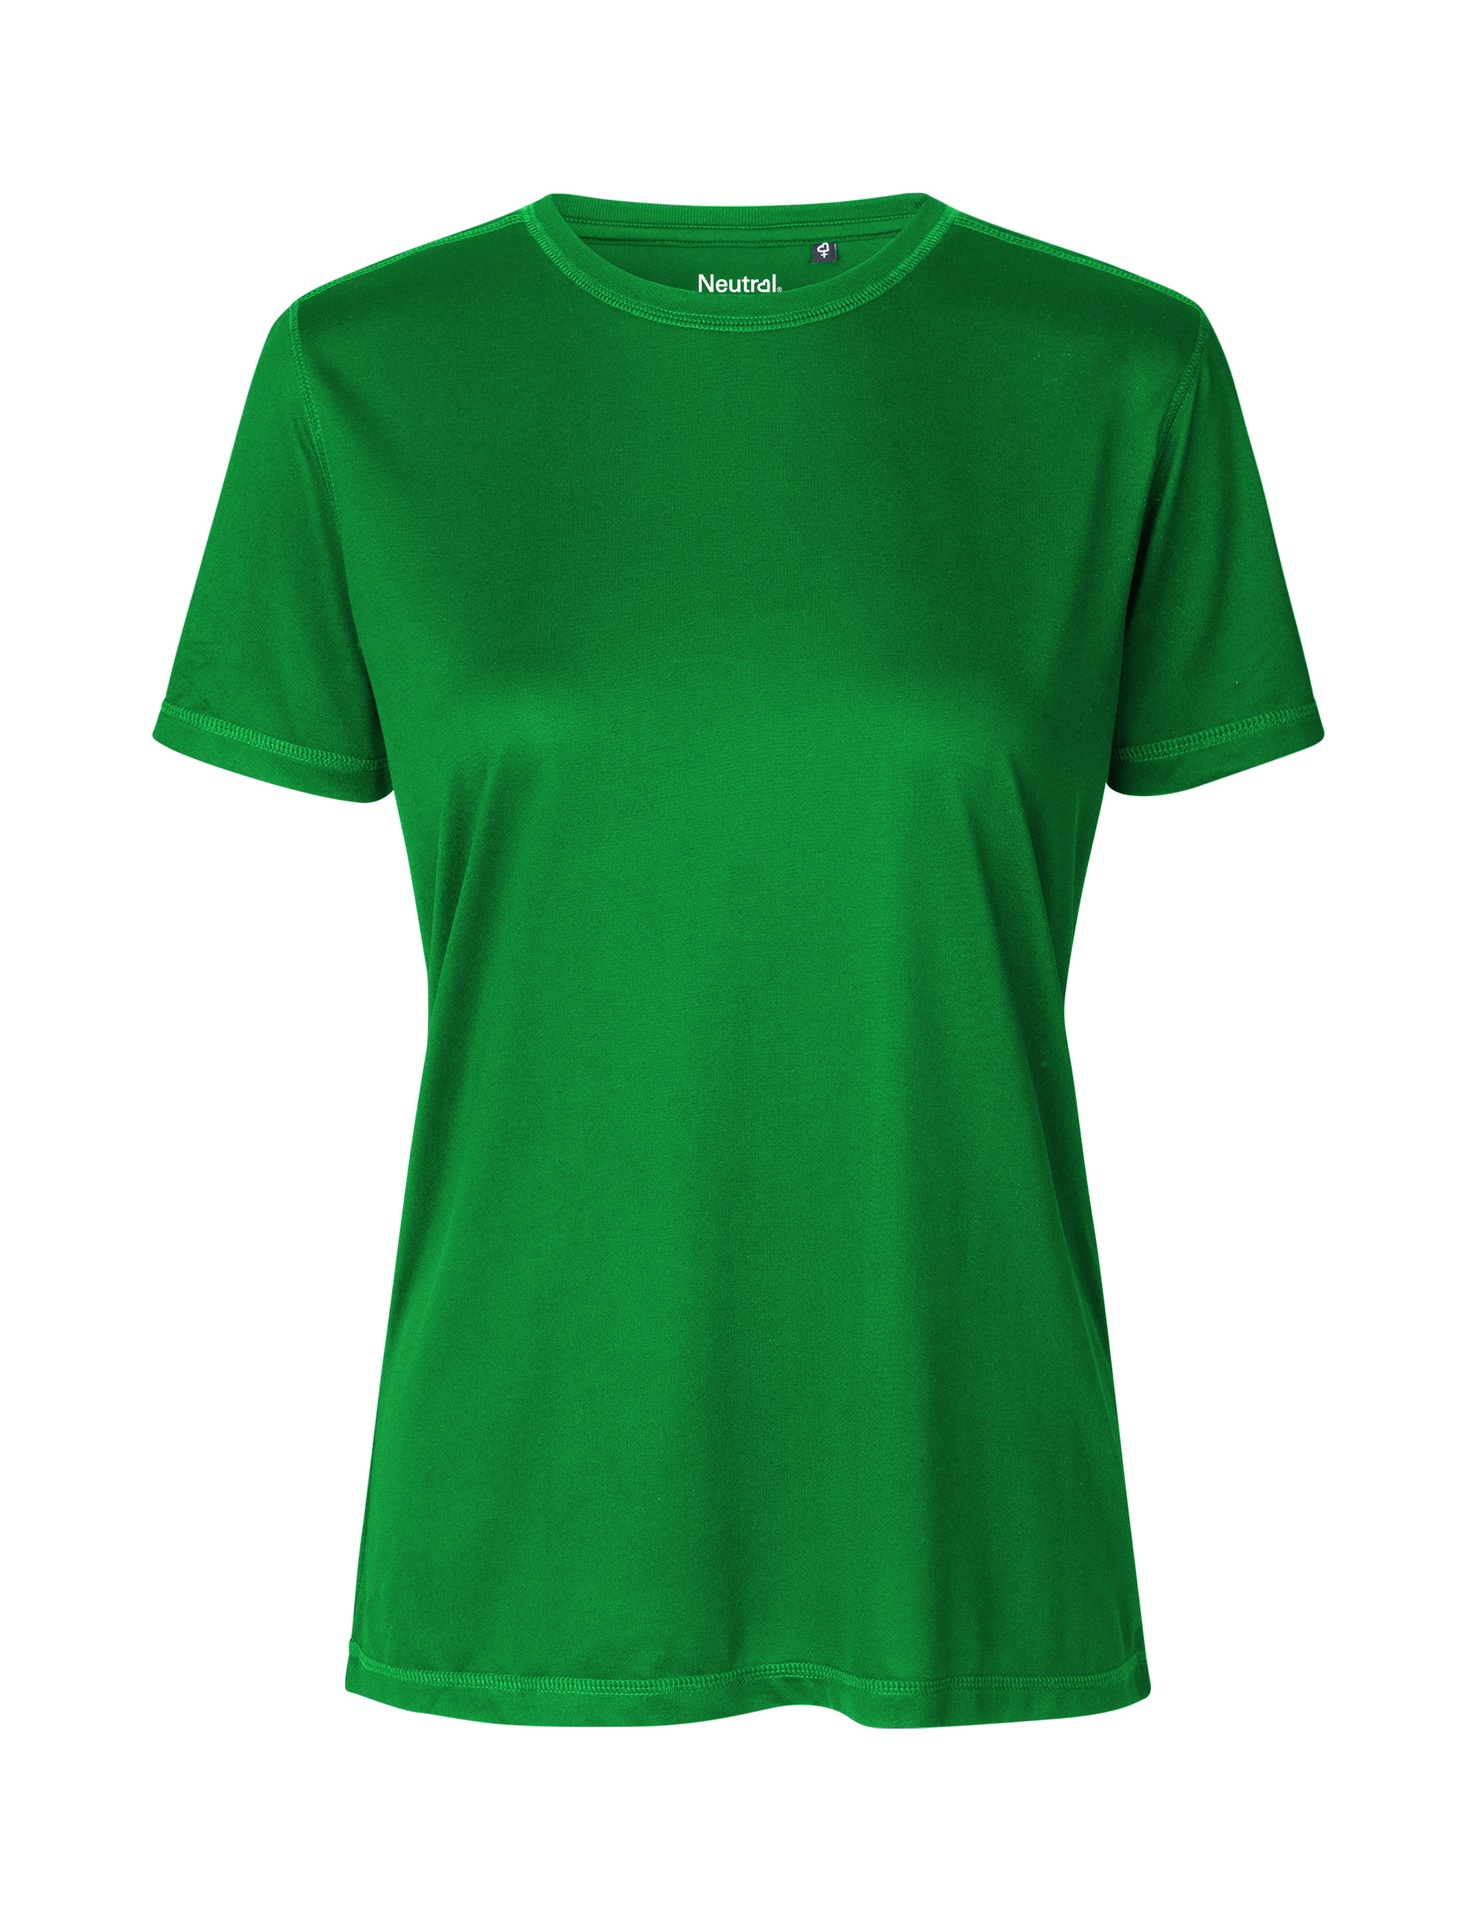 [PR/05253] Ladies Recycled Performance T-Shirt (Green 67, S)